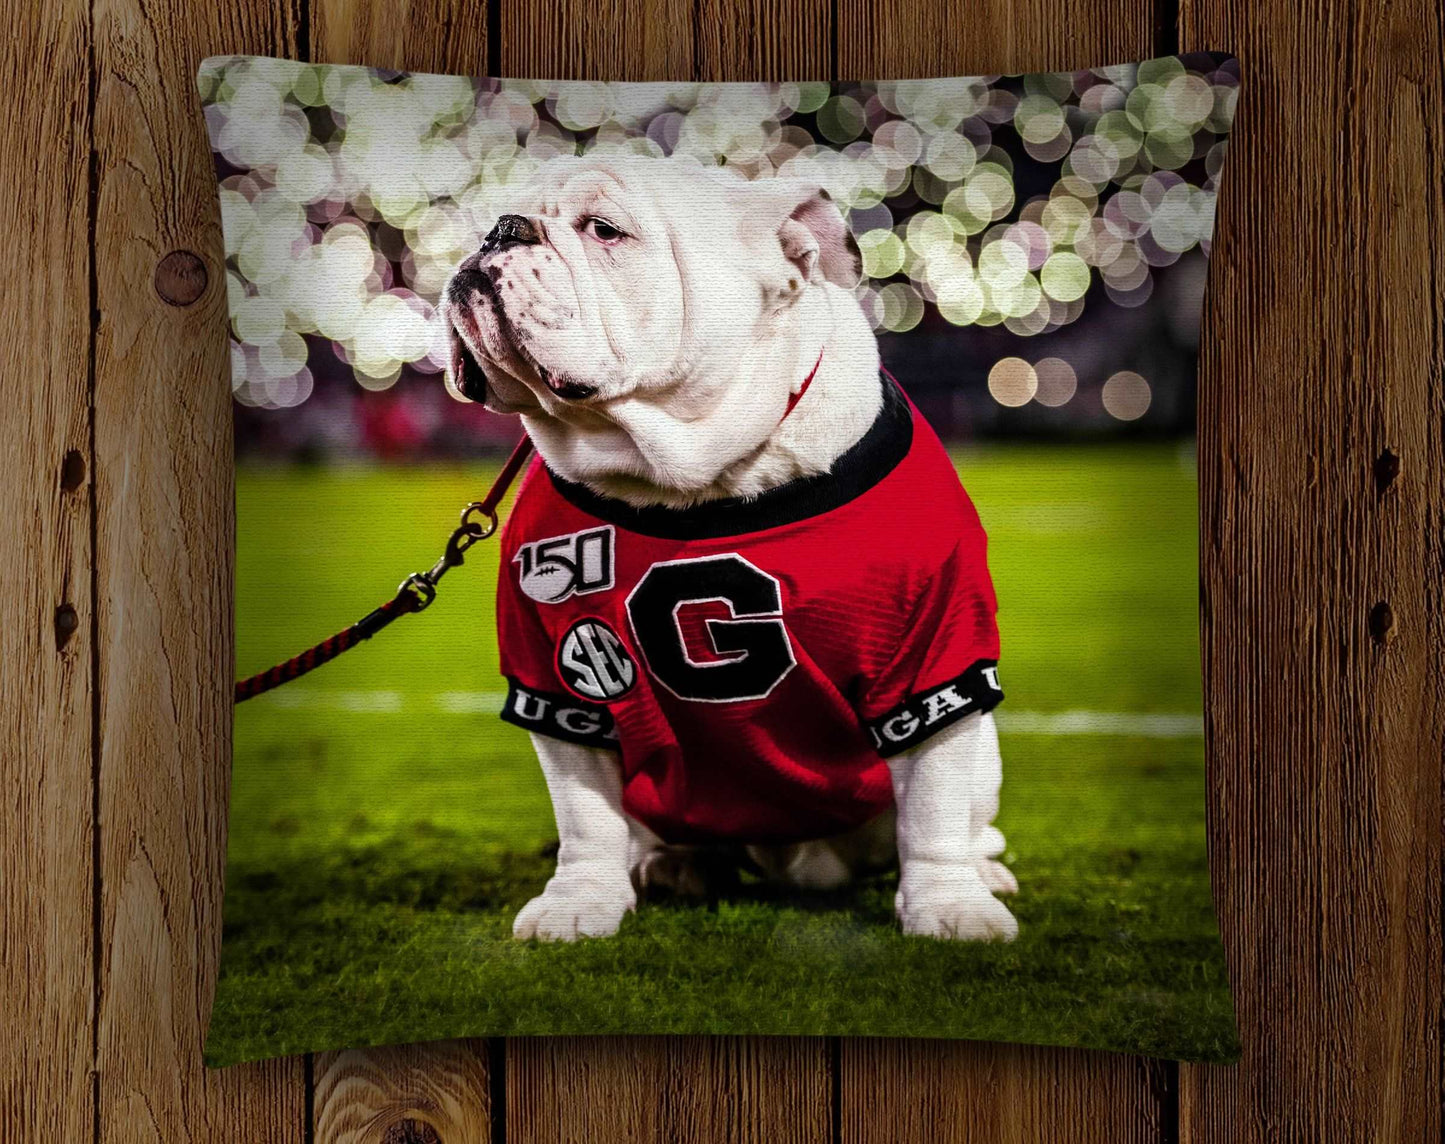 UGA: Georgia Bulldogs Uga X Under the Lights Mascot Throw Pillow - Indoor/Outdoor for Tailgate, Patio, Dawg Cave, Home Decor - WRIGHT PHOTO